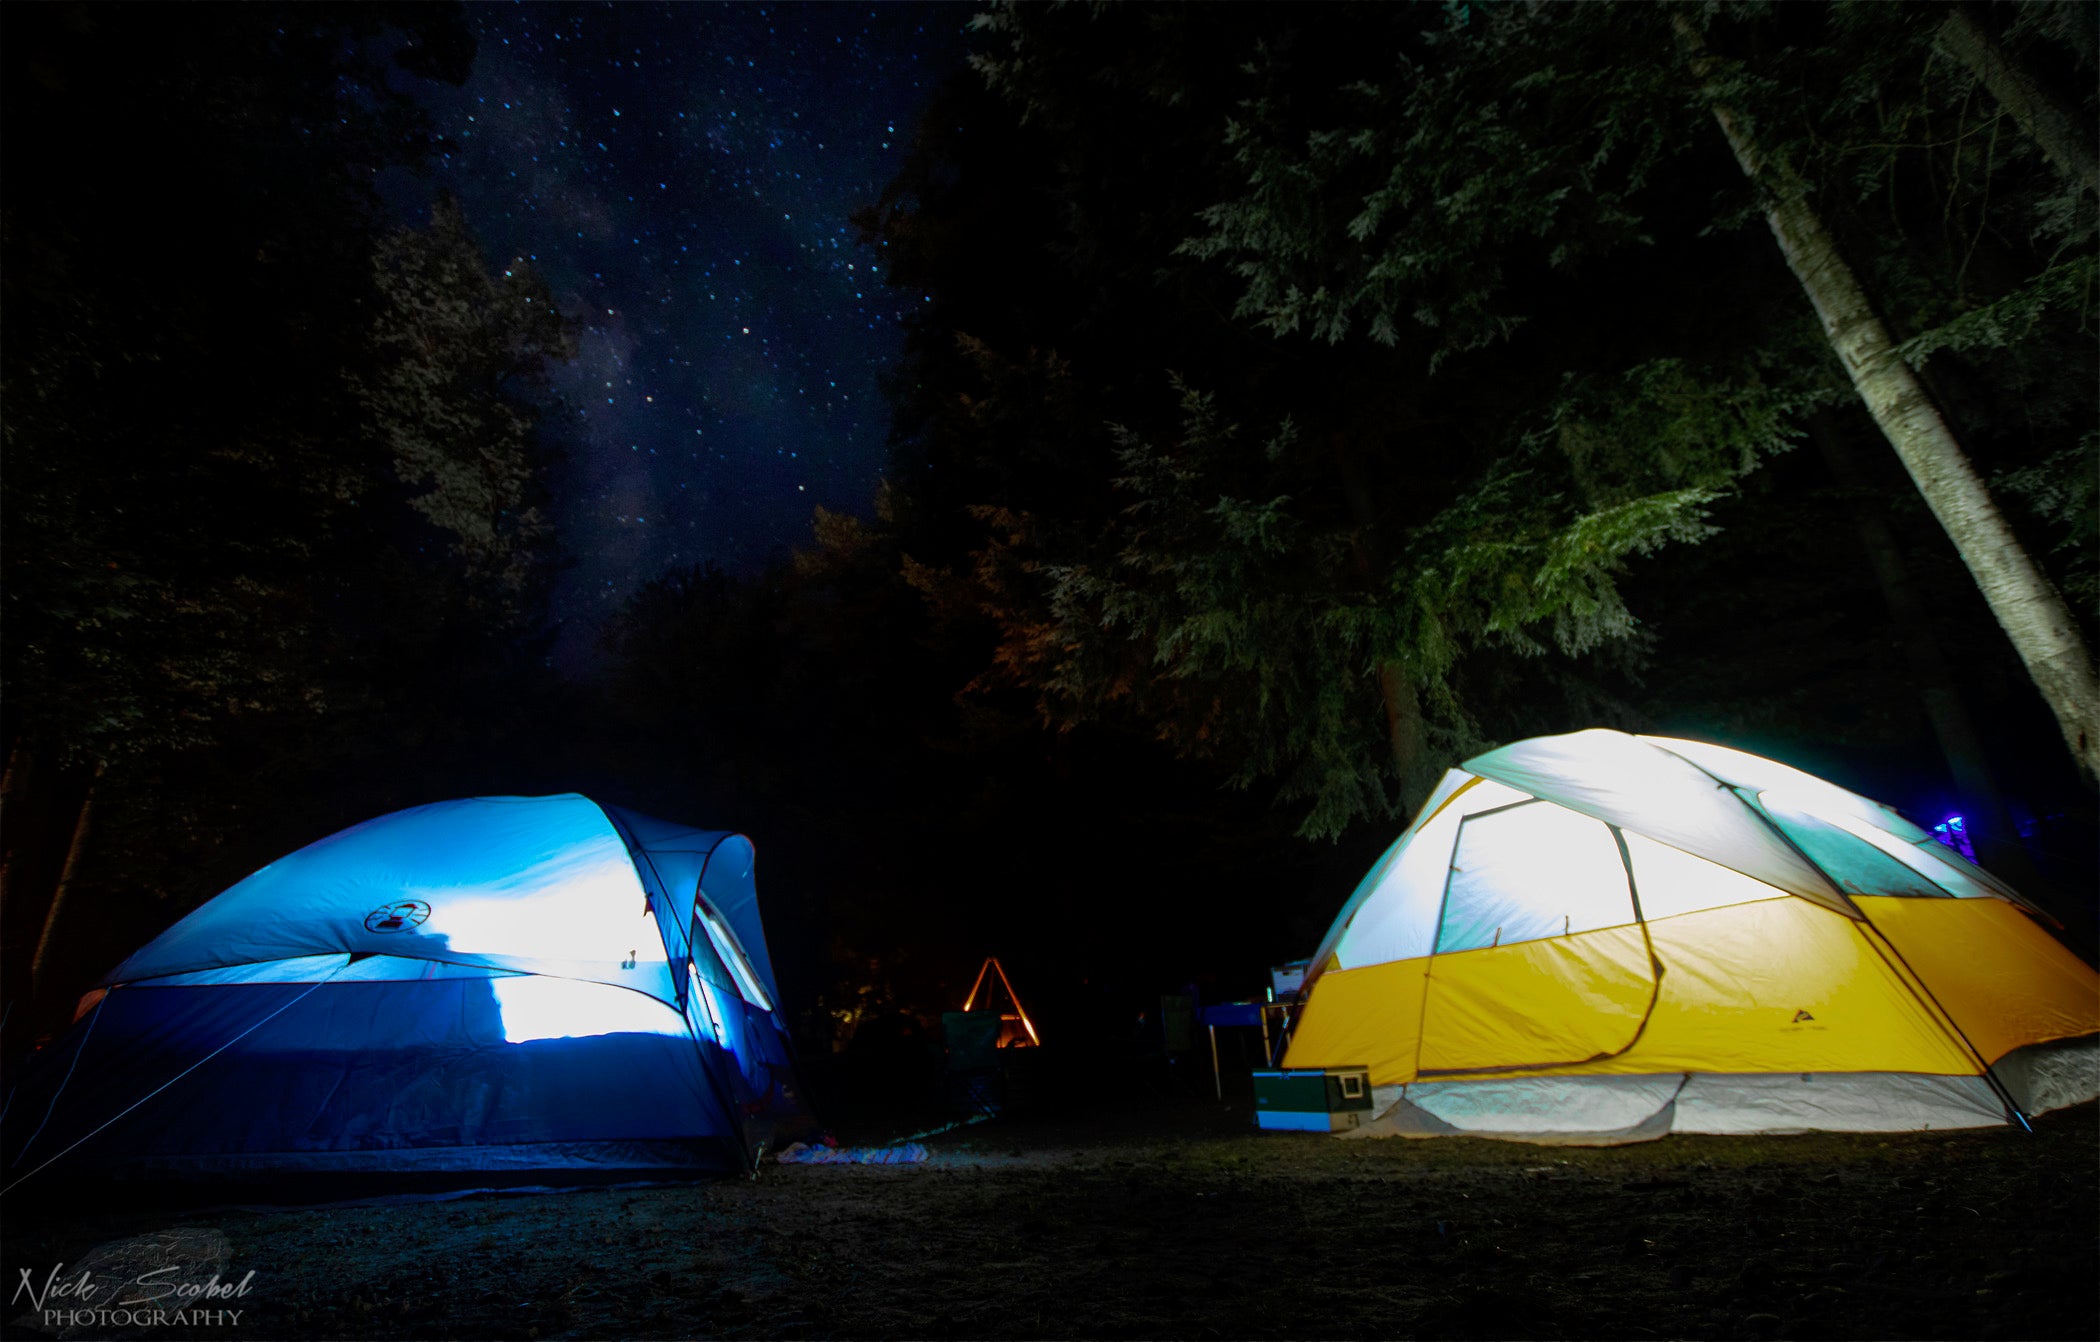 Our campground. Photo by Nick Scobel.